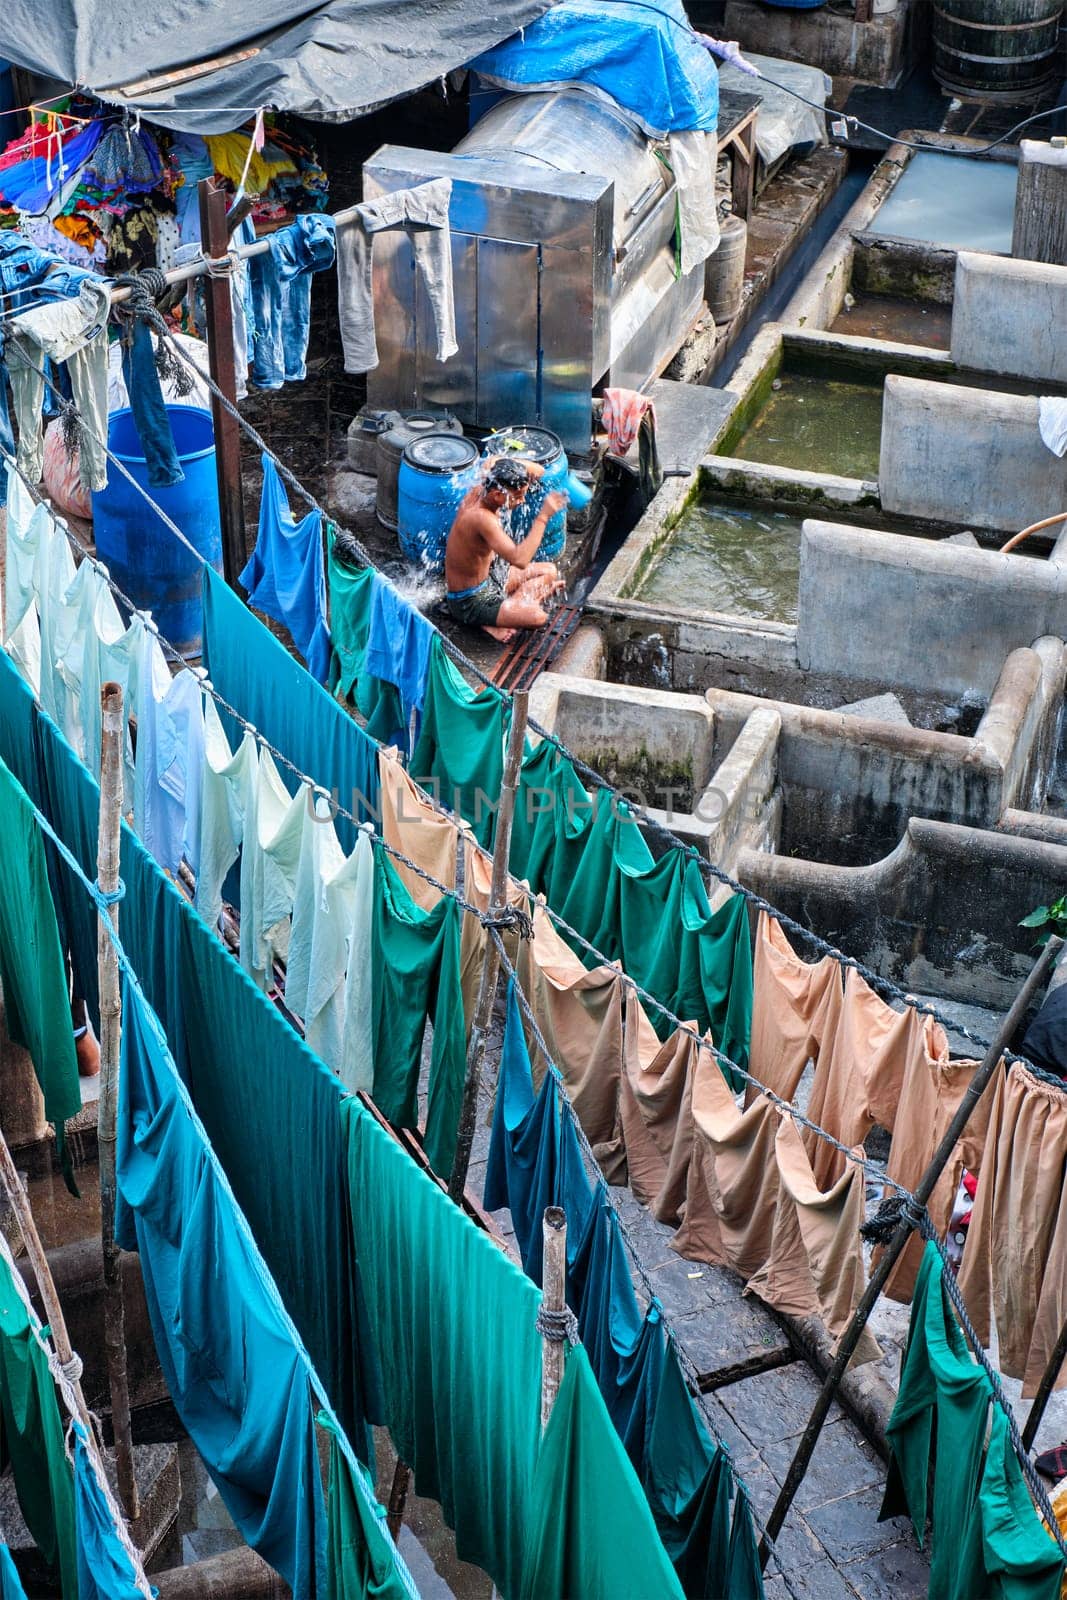 Dhobi Ghat Mahalaxmi Dhobi Ghat is an open air laundromat lavoir in Mumbai, India with laundry drying on ropes by dimol